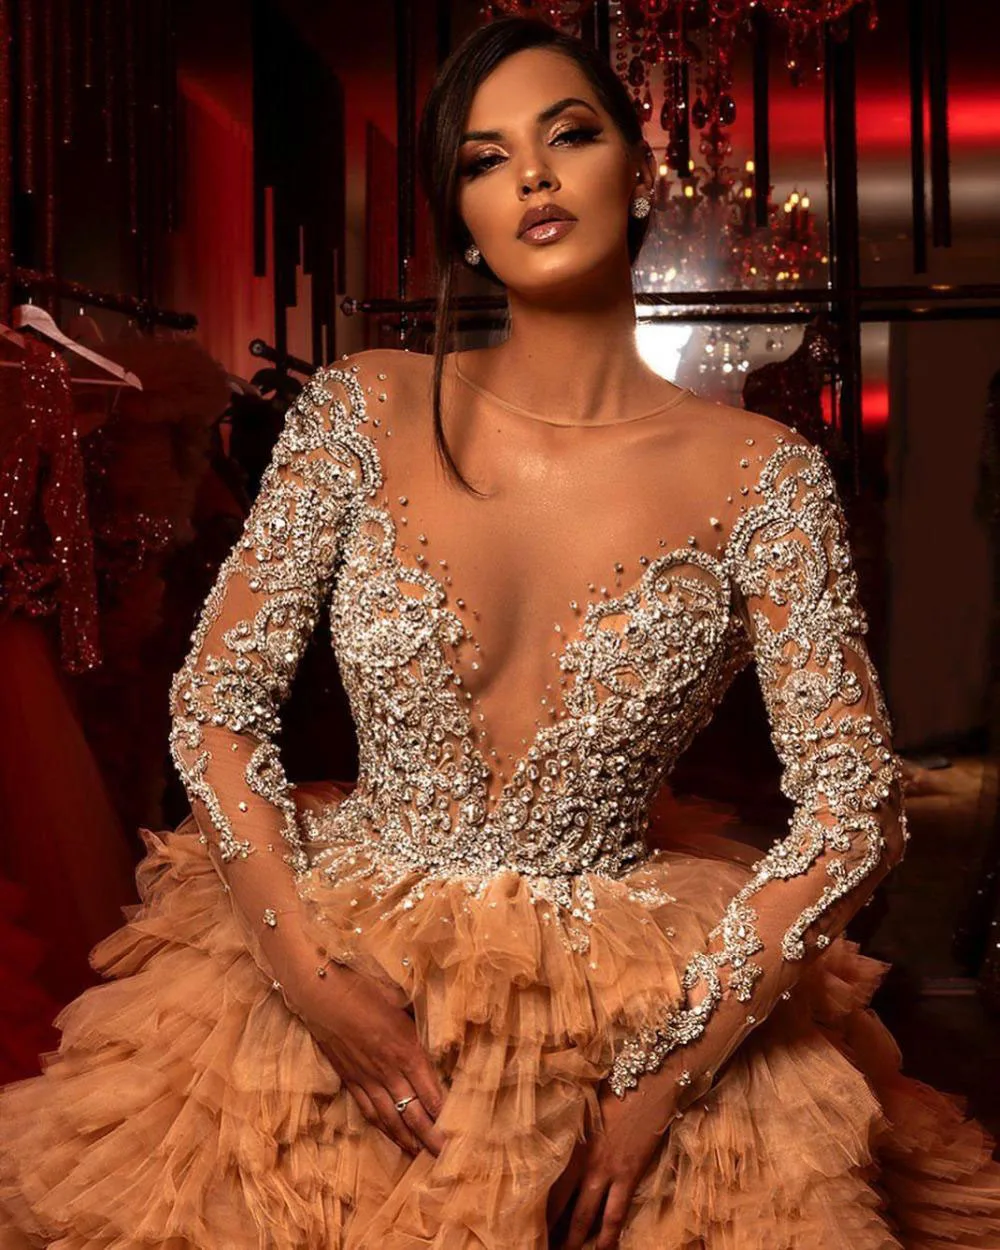 

Luxurious Gold Tiered Tulle Evening Dresses Beaded Crystals Sheer Neck Prom Dress Long Sleeves Formal Gowns Vestidos de gala